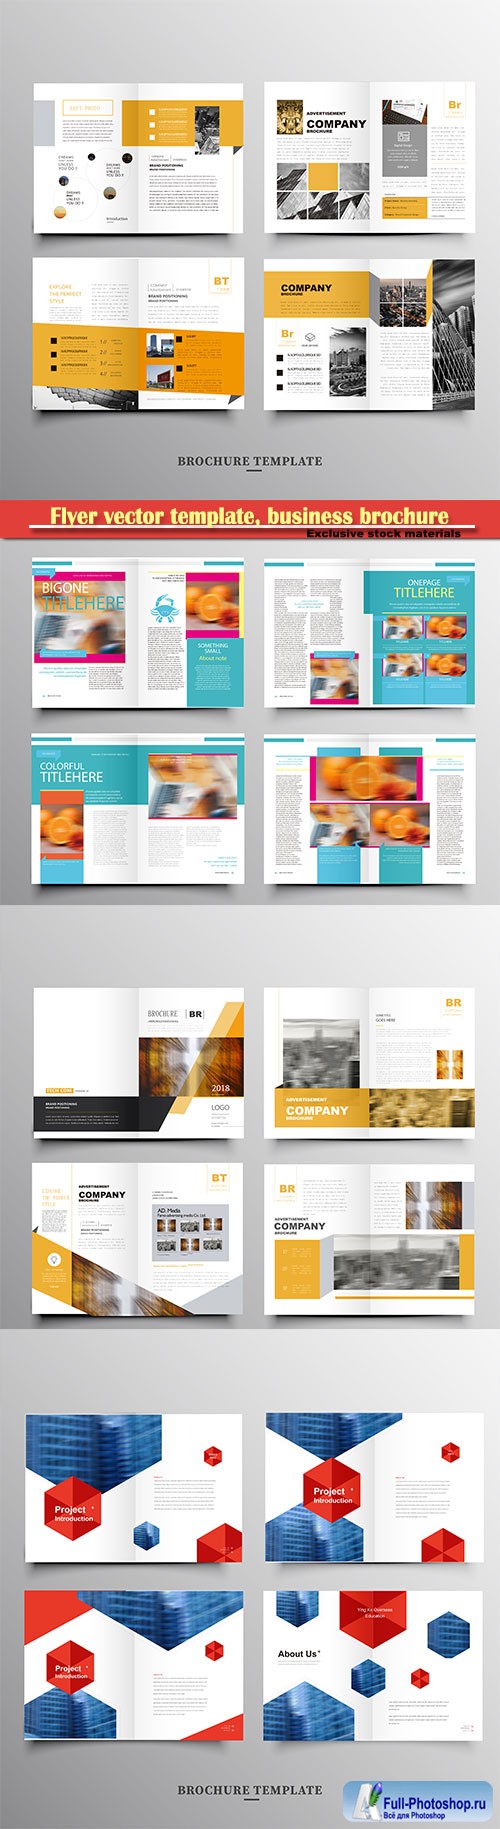 Flyer vector template, business brochure, magazine cover # 30